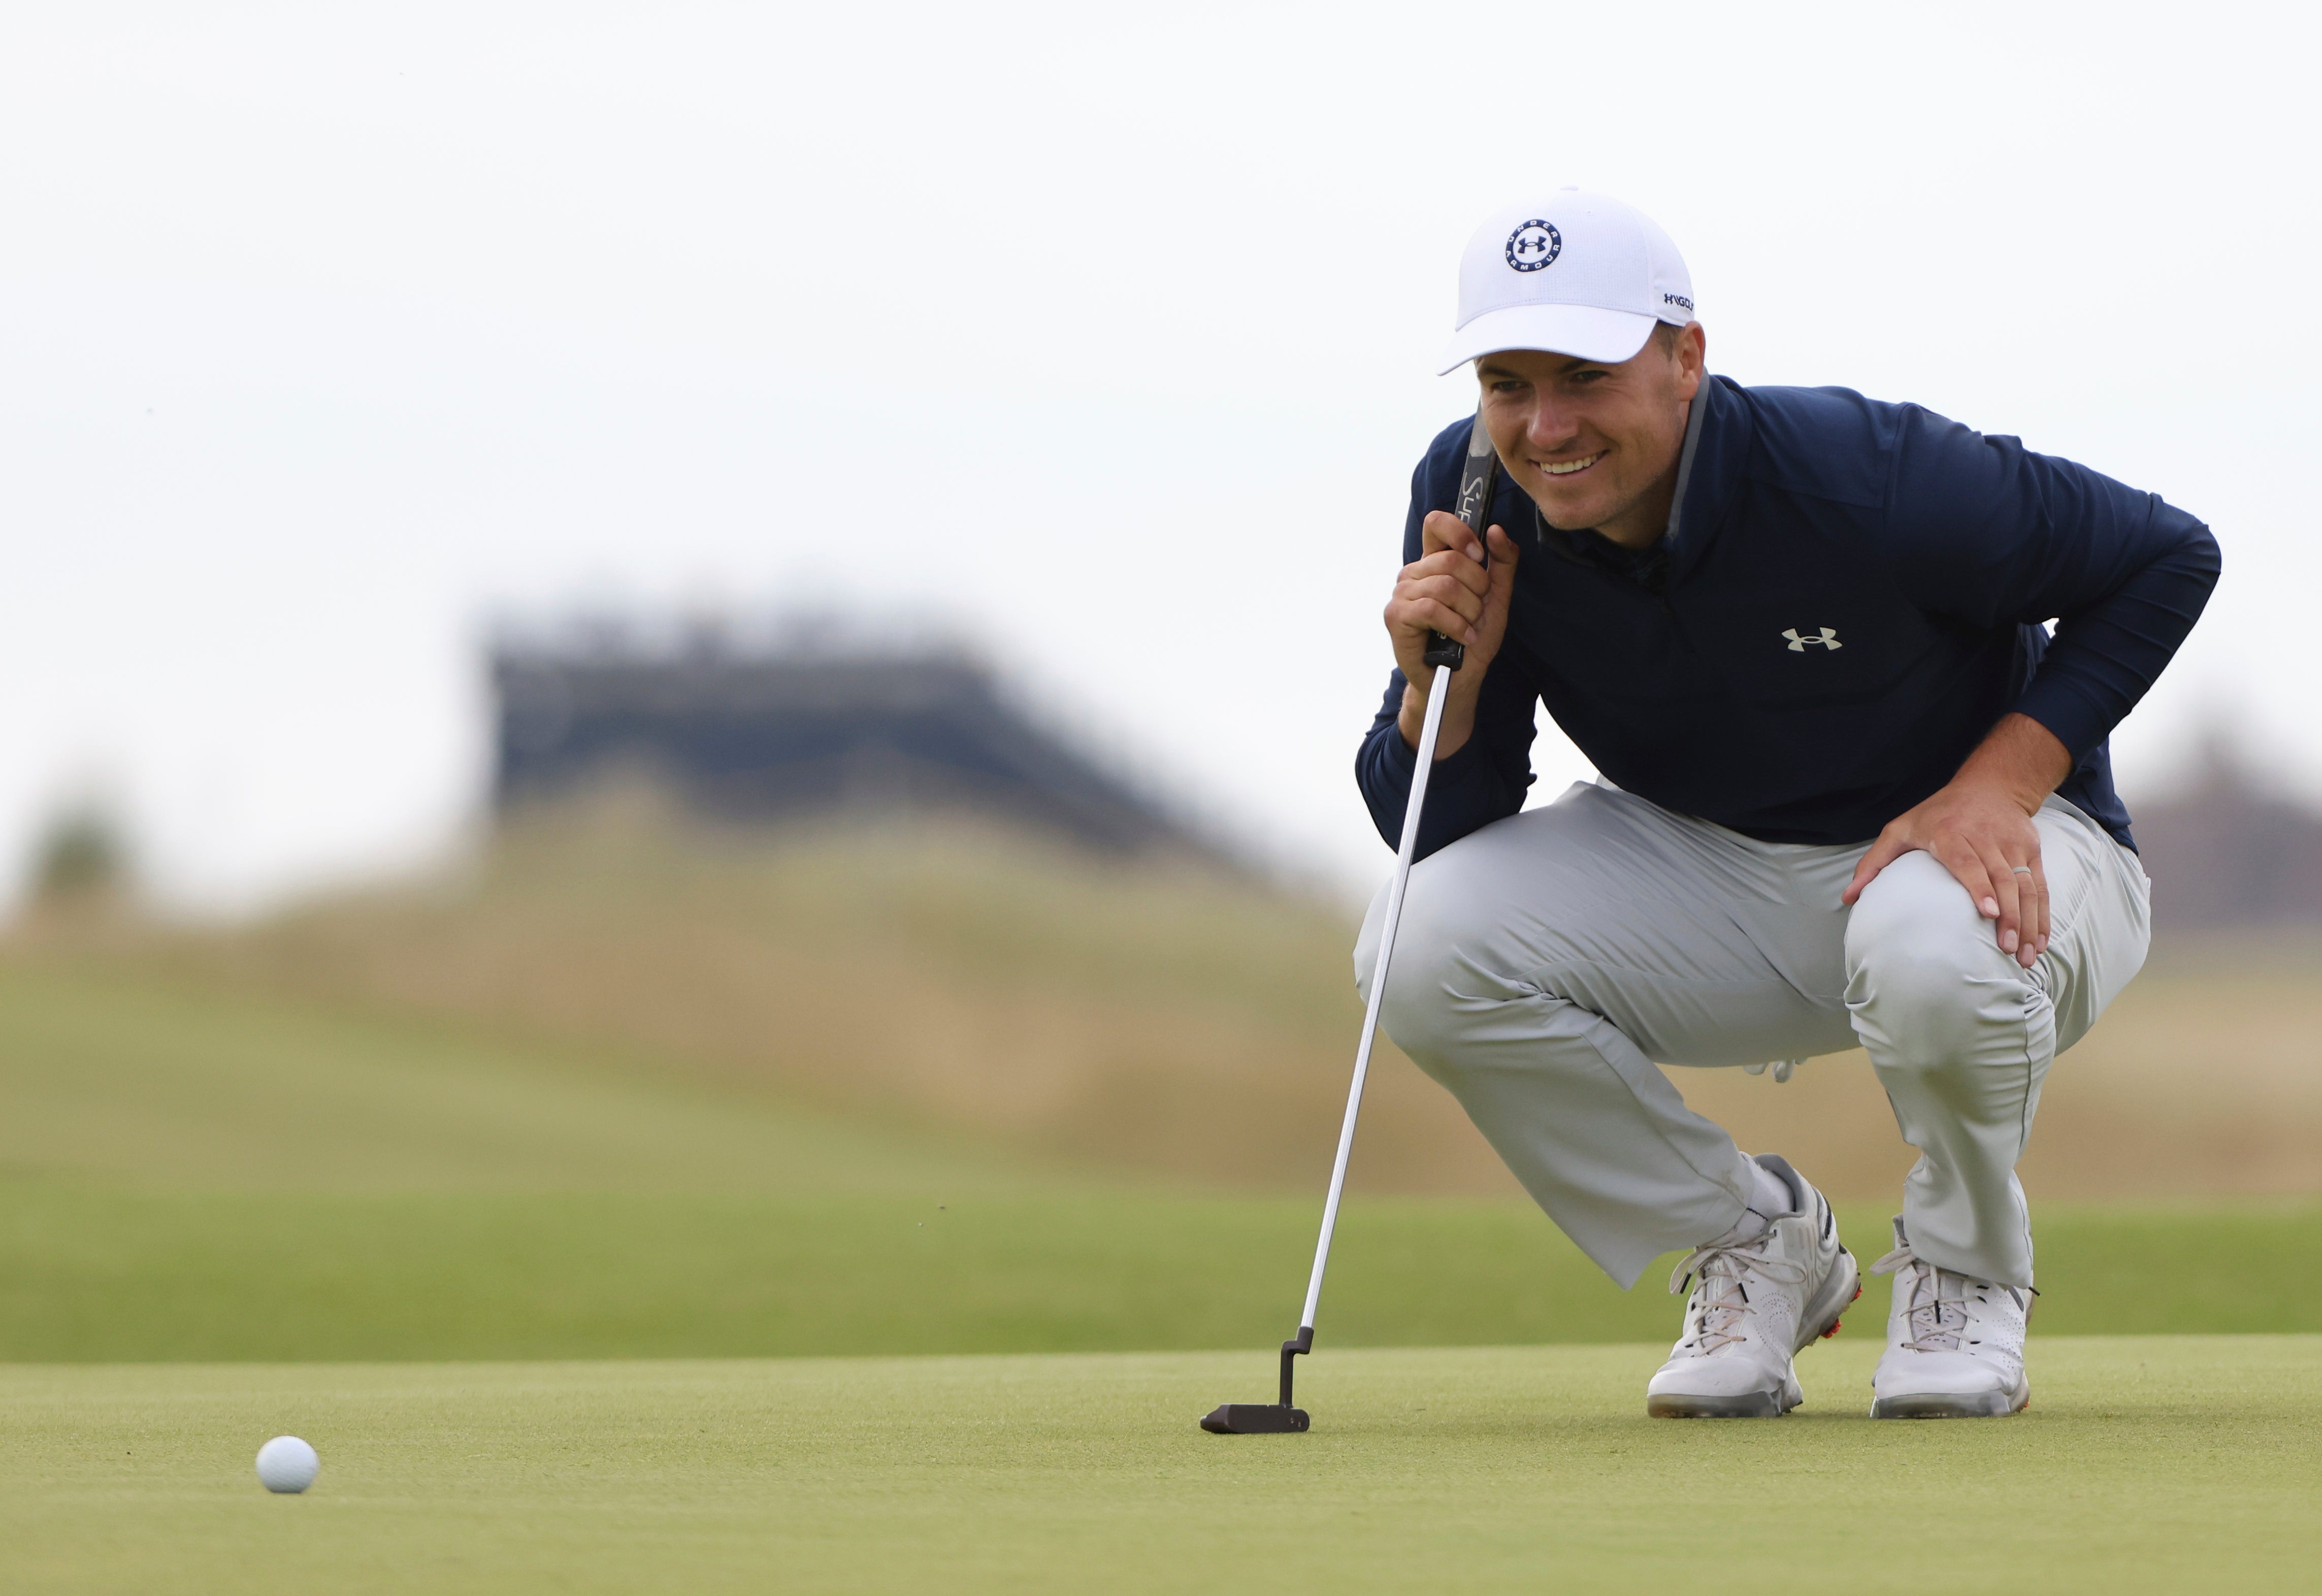 Jordan Spieth during a practice round at Royal St George’s on Tuesday